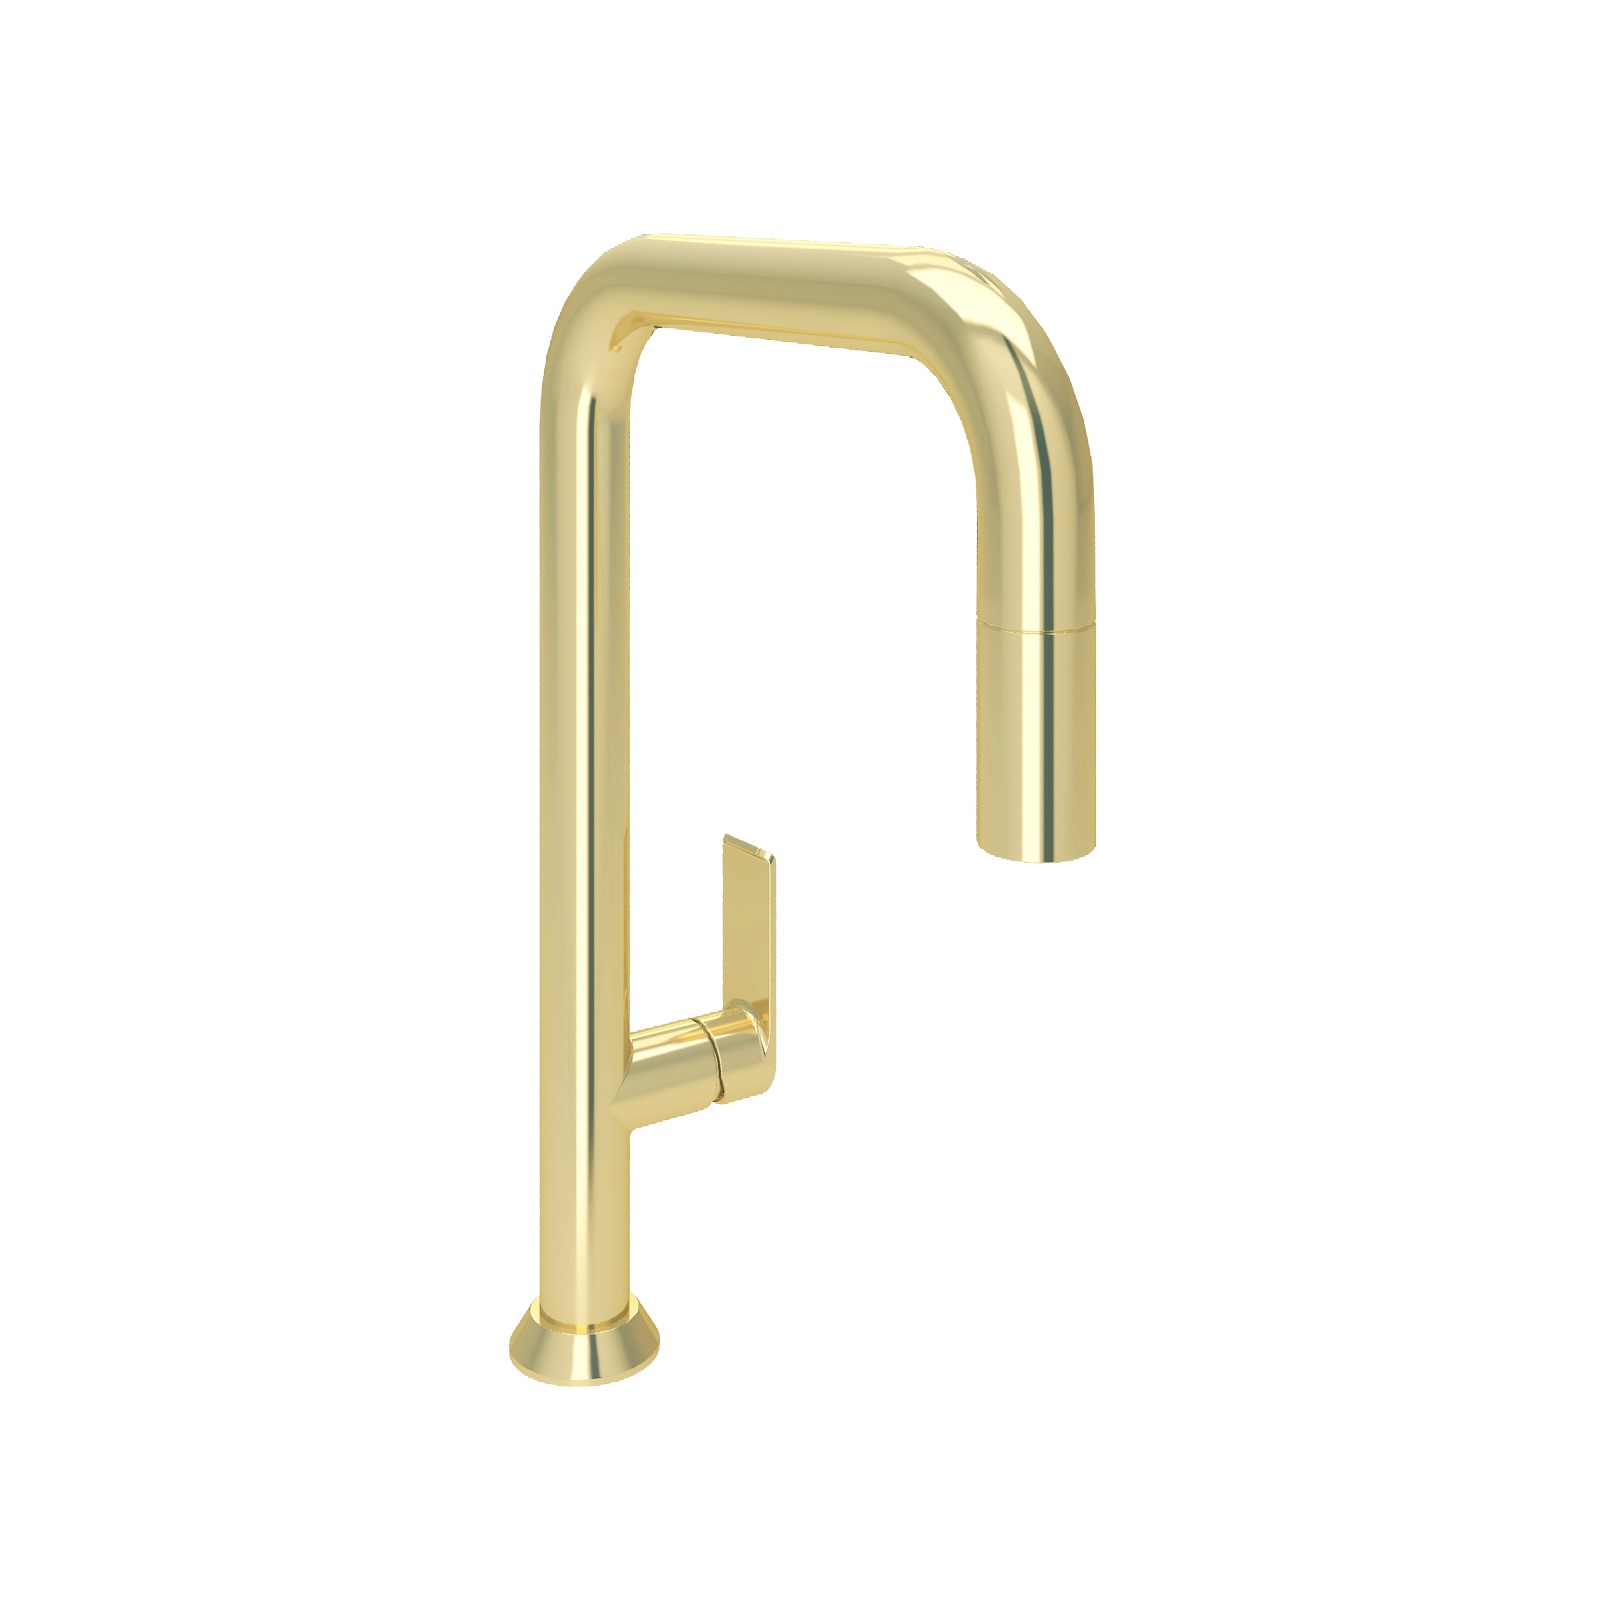 Tube H15 Collection- Single Hole Kitchen Faucet with 2-Function Pull-Down Spray in Gold